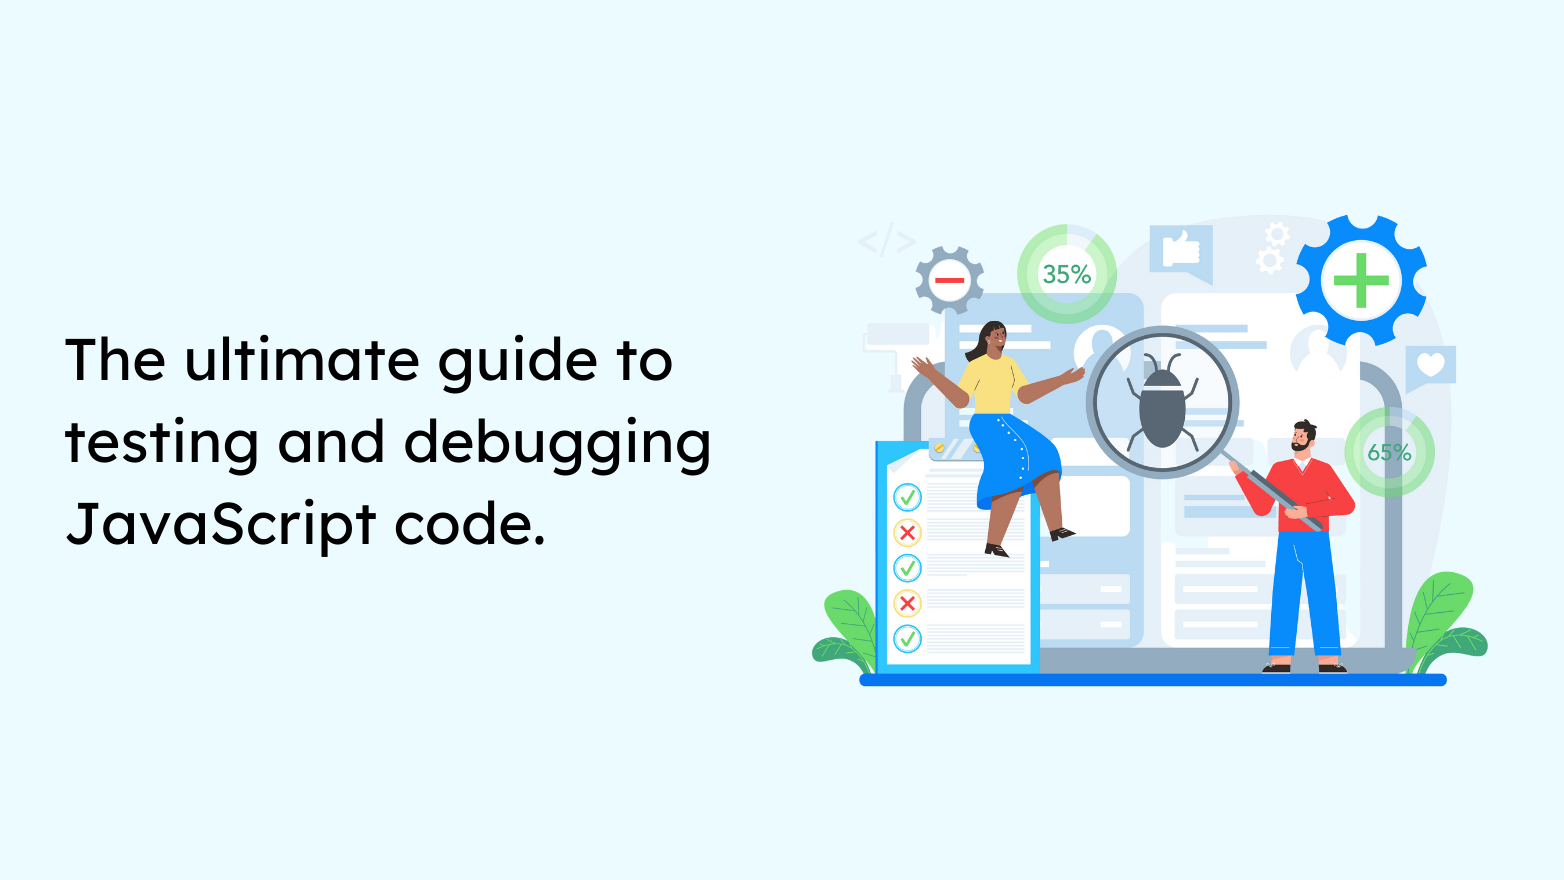 The ultimate guide to testing and debugging JavaScript code.